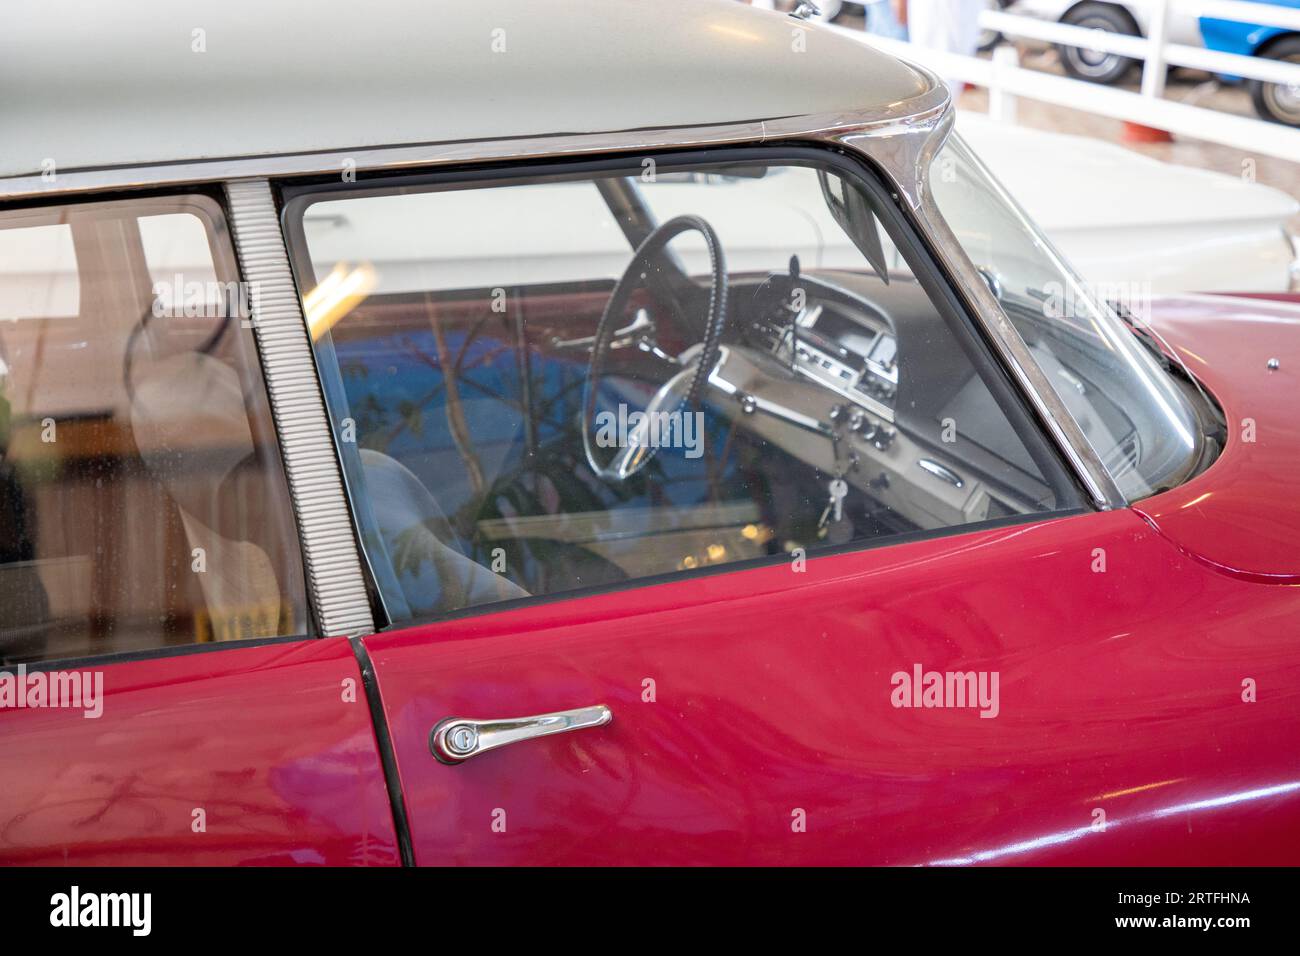 Talmont , France - 09 12 2023 : Citroen DS red car interior vintage French luxury vehicle from sixties Stock Photo